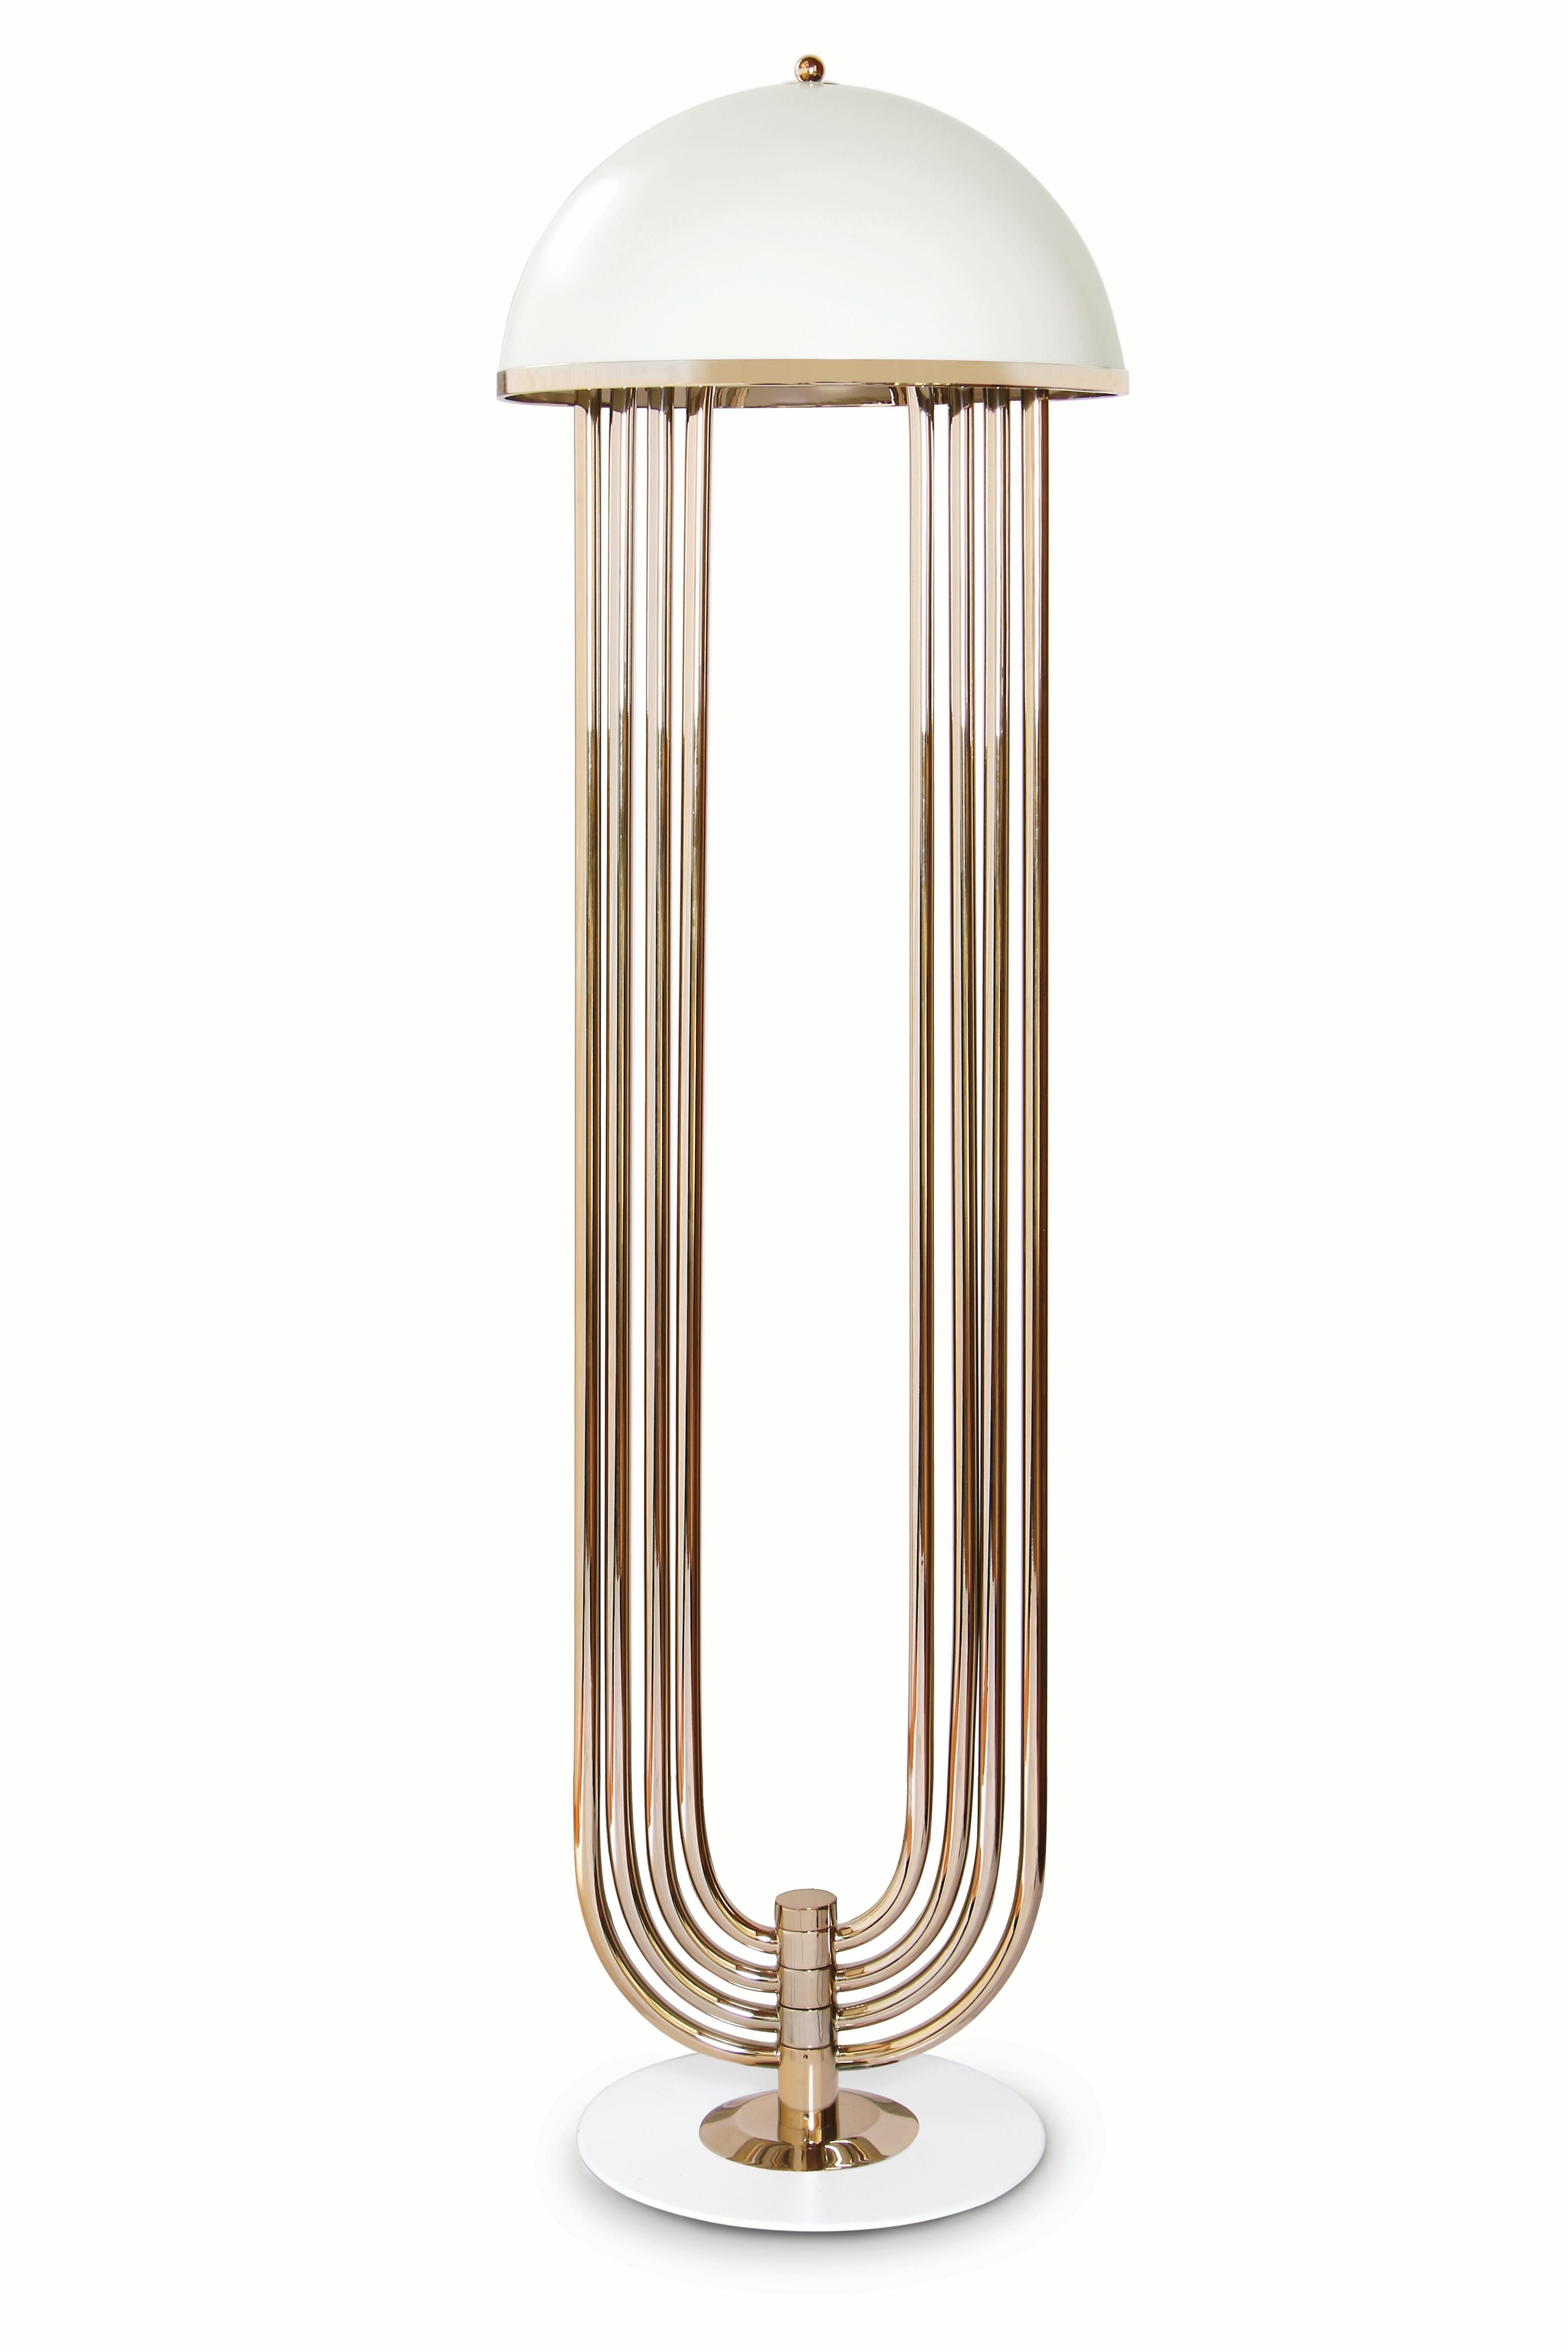 Turner floor lamp was inspired by Tina Turner’s electrifying dance moves. Ideal for any hotel design project, this Art Deco floor lamp will fit perfectly in a modern lobby entrance or next to a midcentury lounge chair. This midcentury floor lamp has